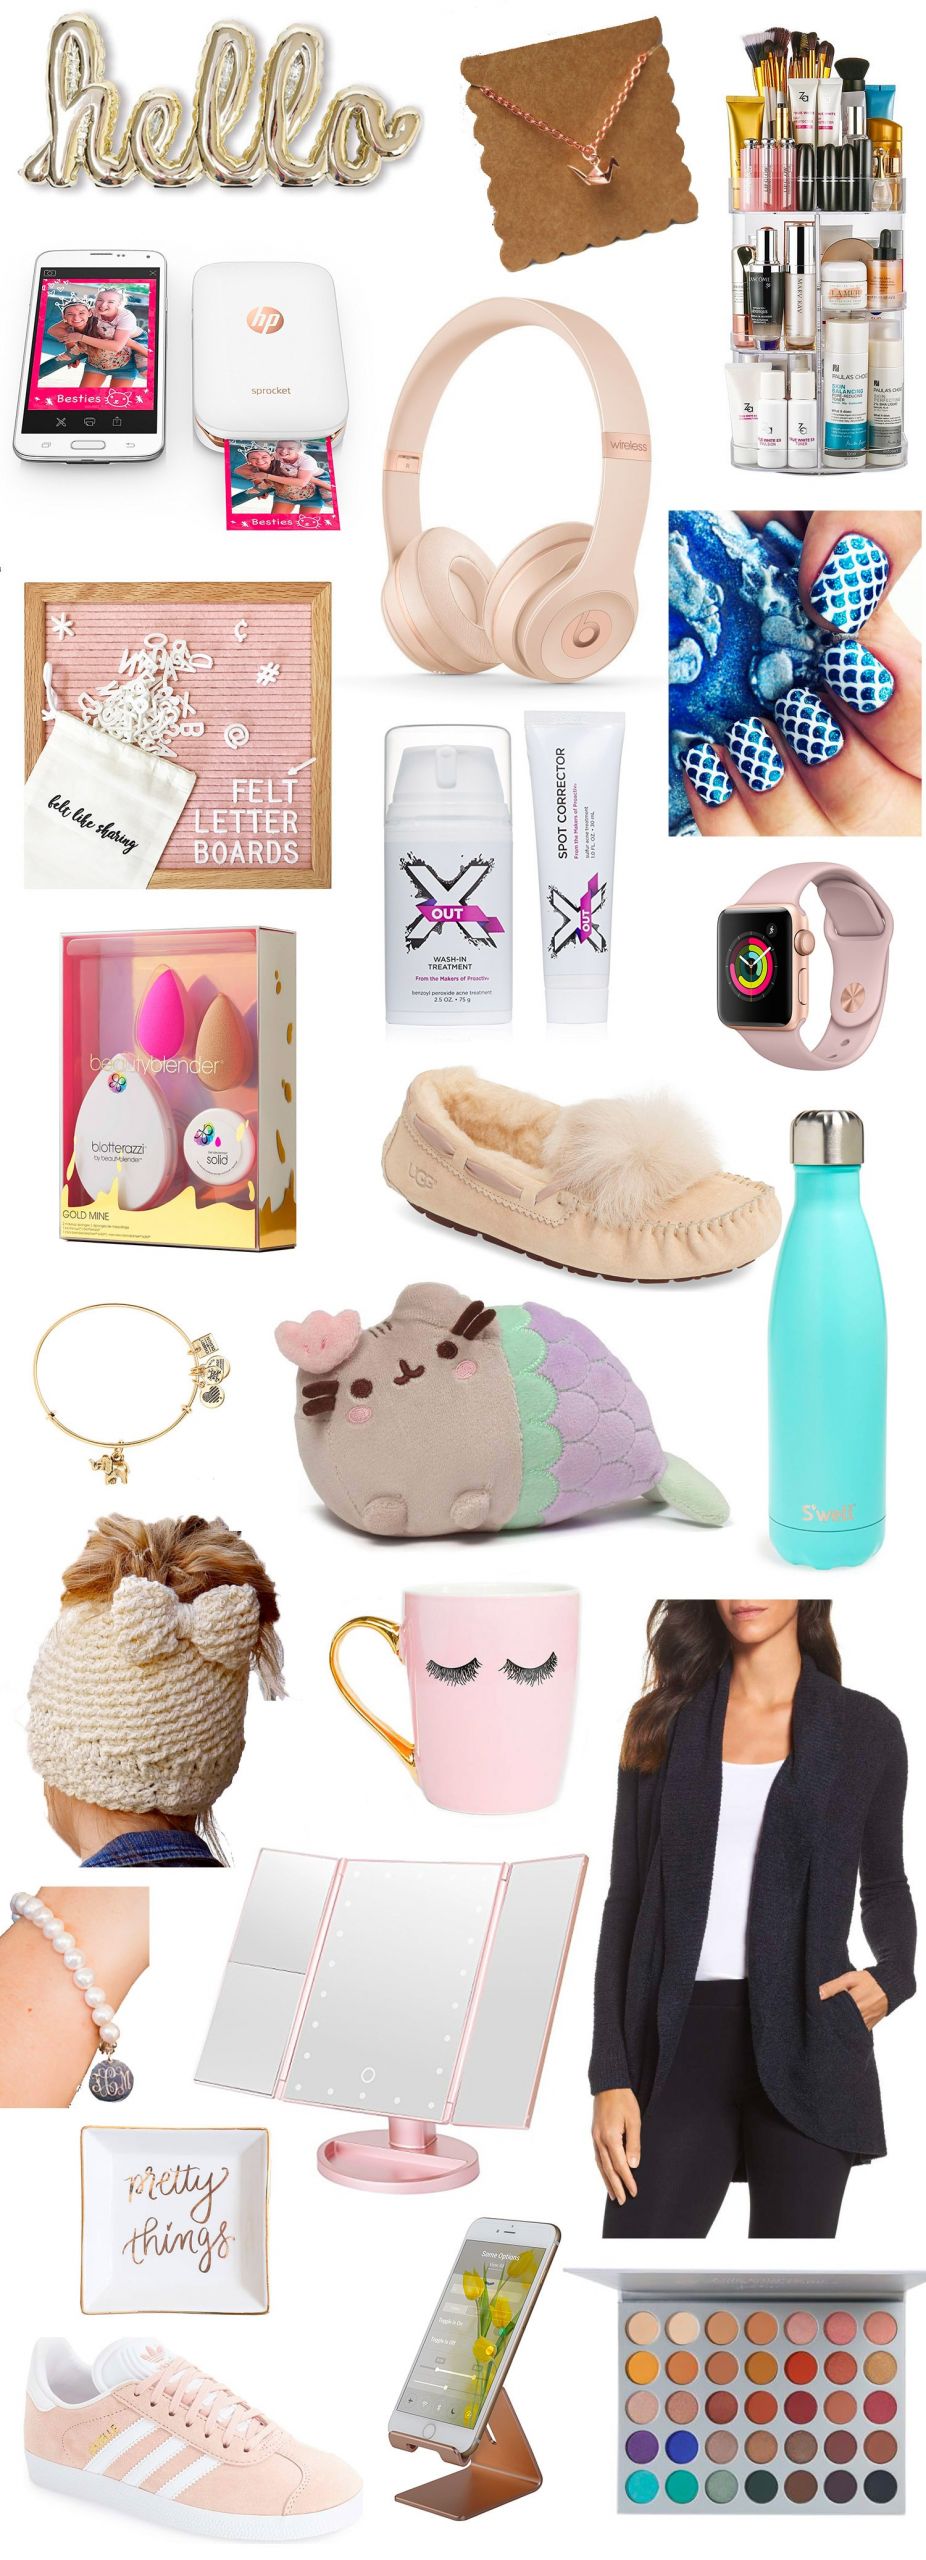 Great Gift Ideas For Girls
 Top Gifts for Teens This Christmas